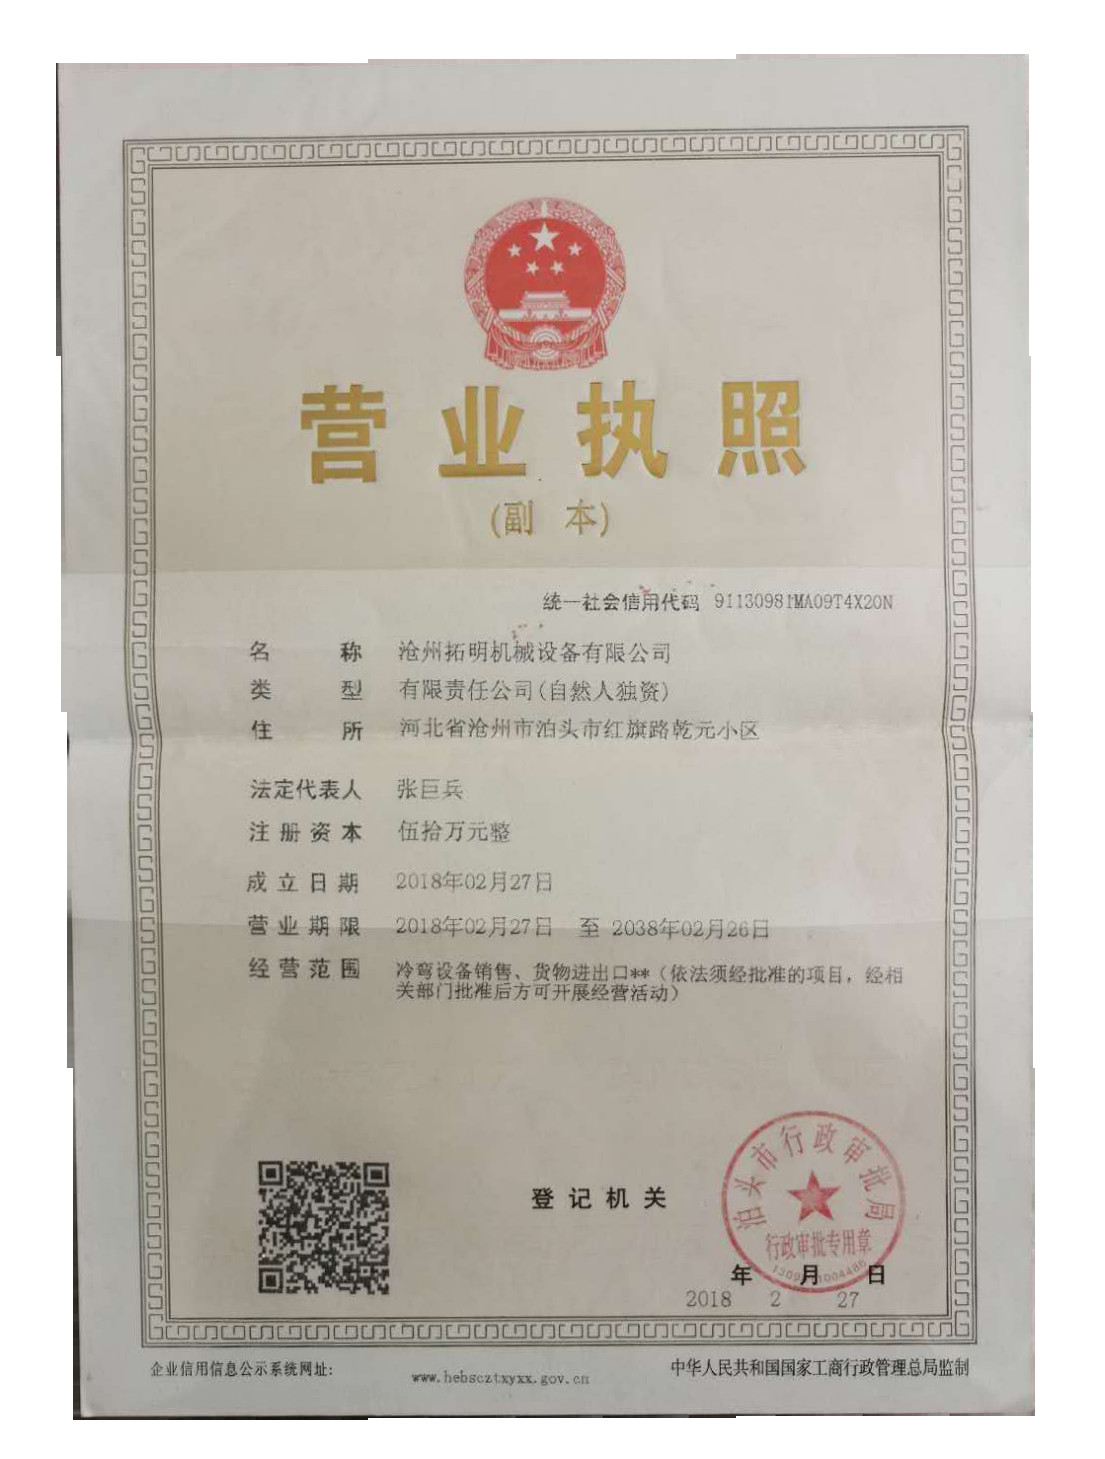 Chine cangzhou tuoming machine co.,ltd Certifications